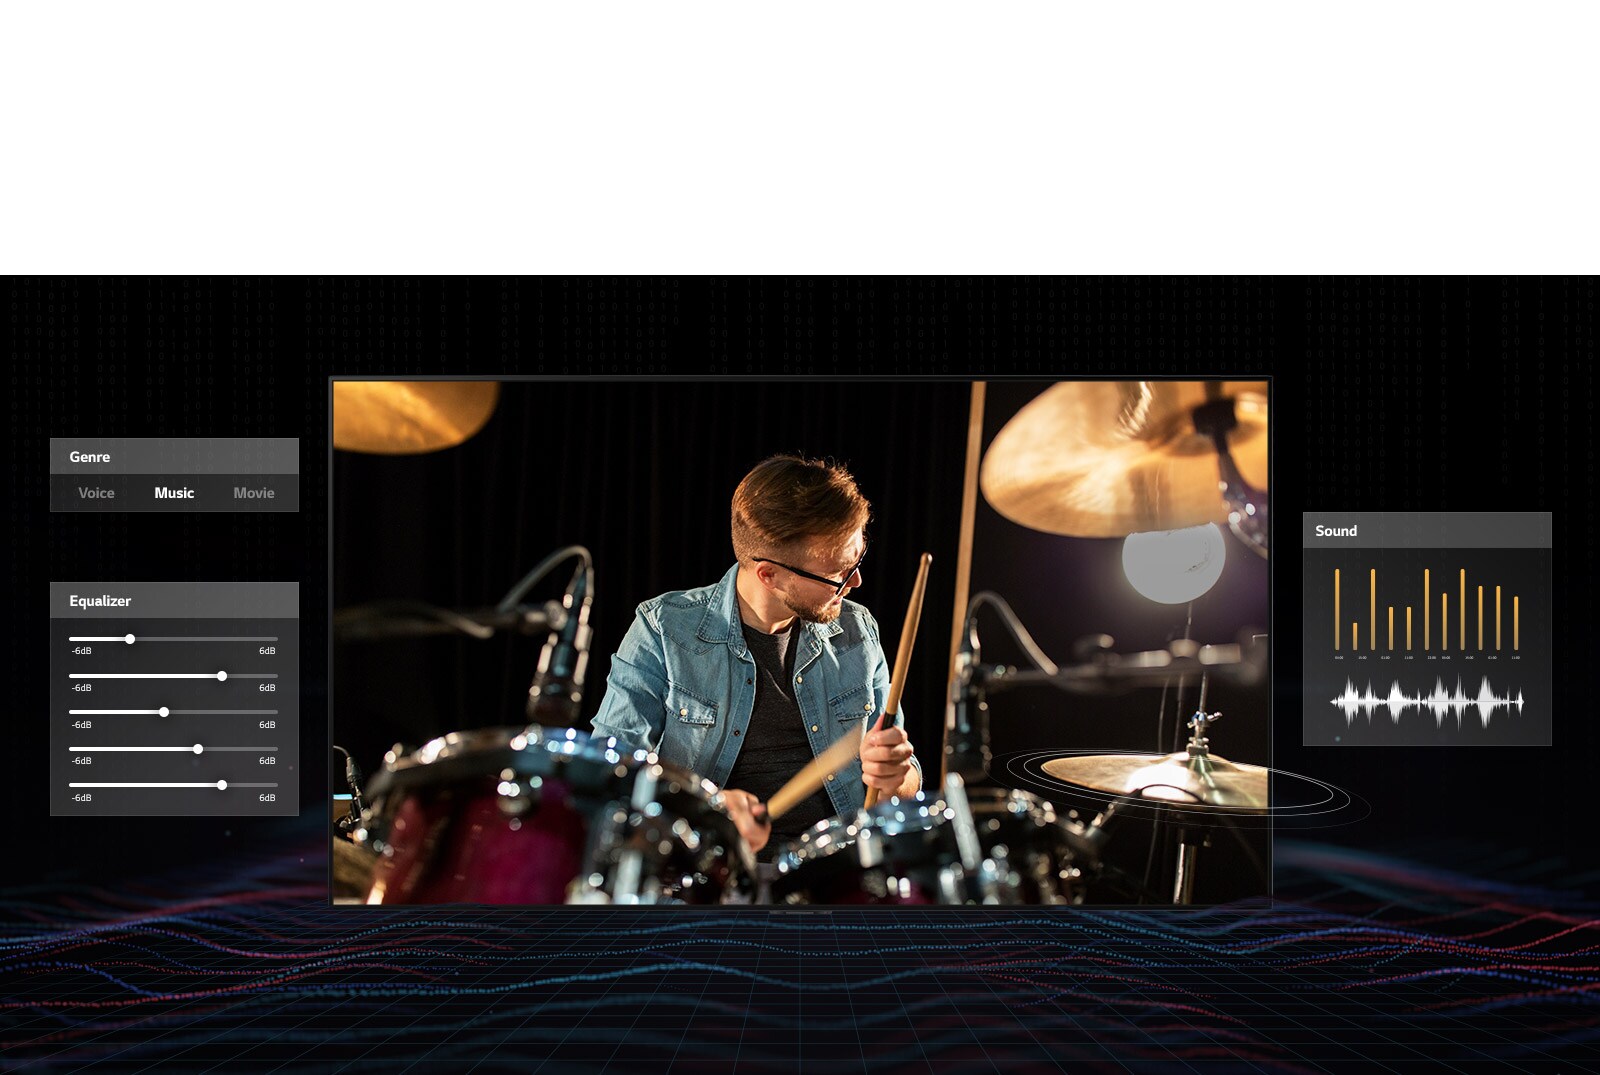 A man in glasses playing drums with music dashboard graphics on both sides